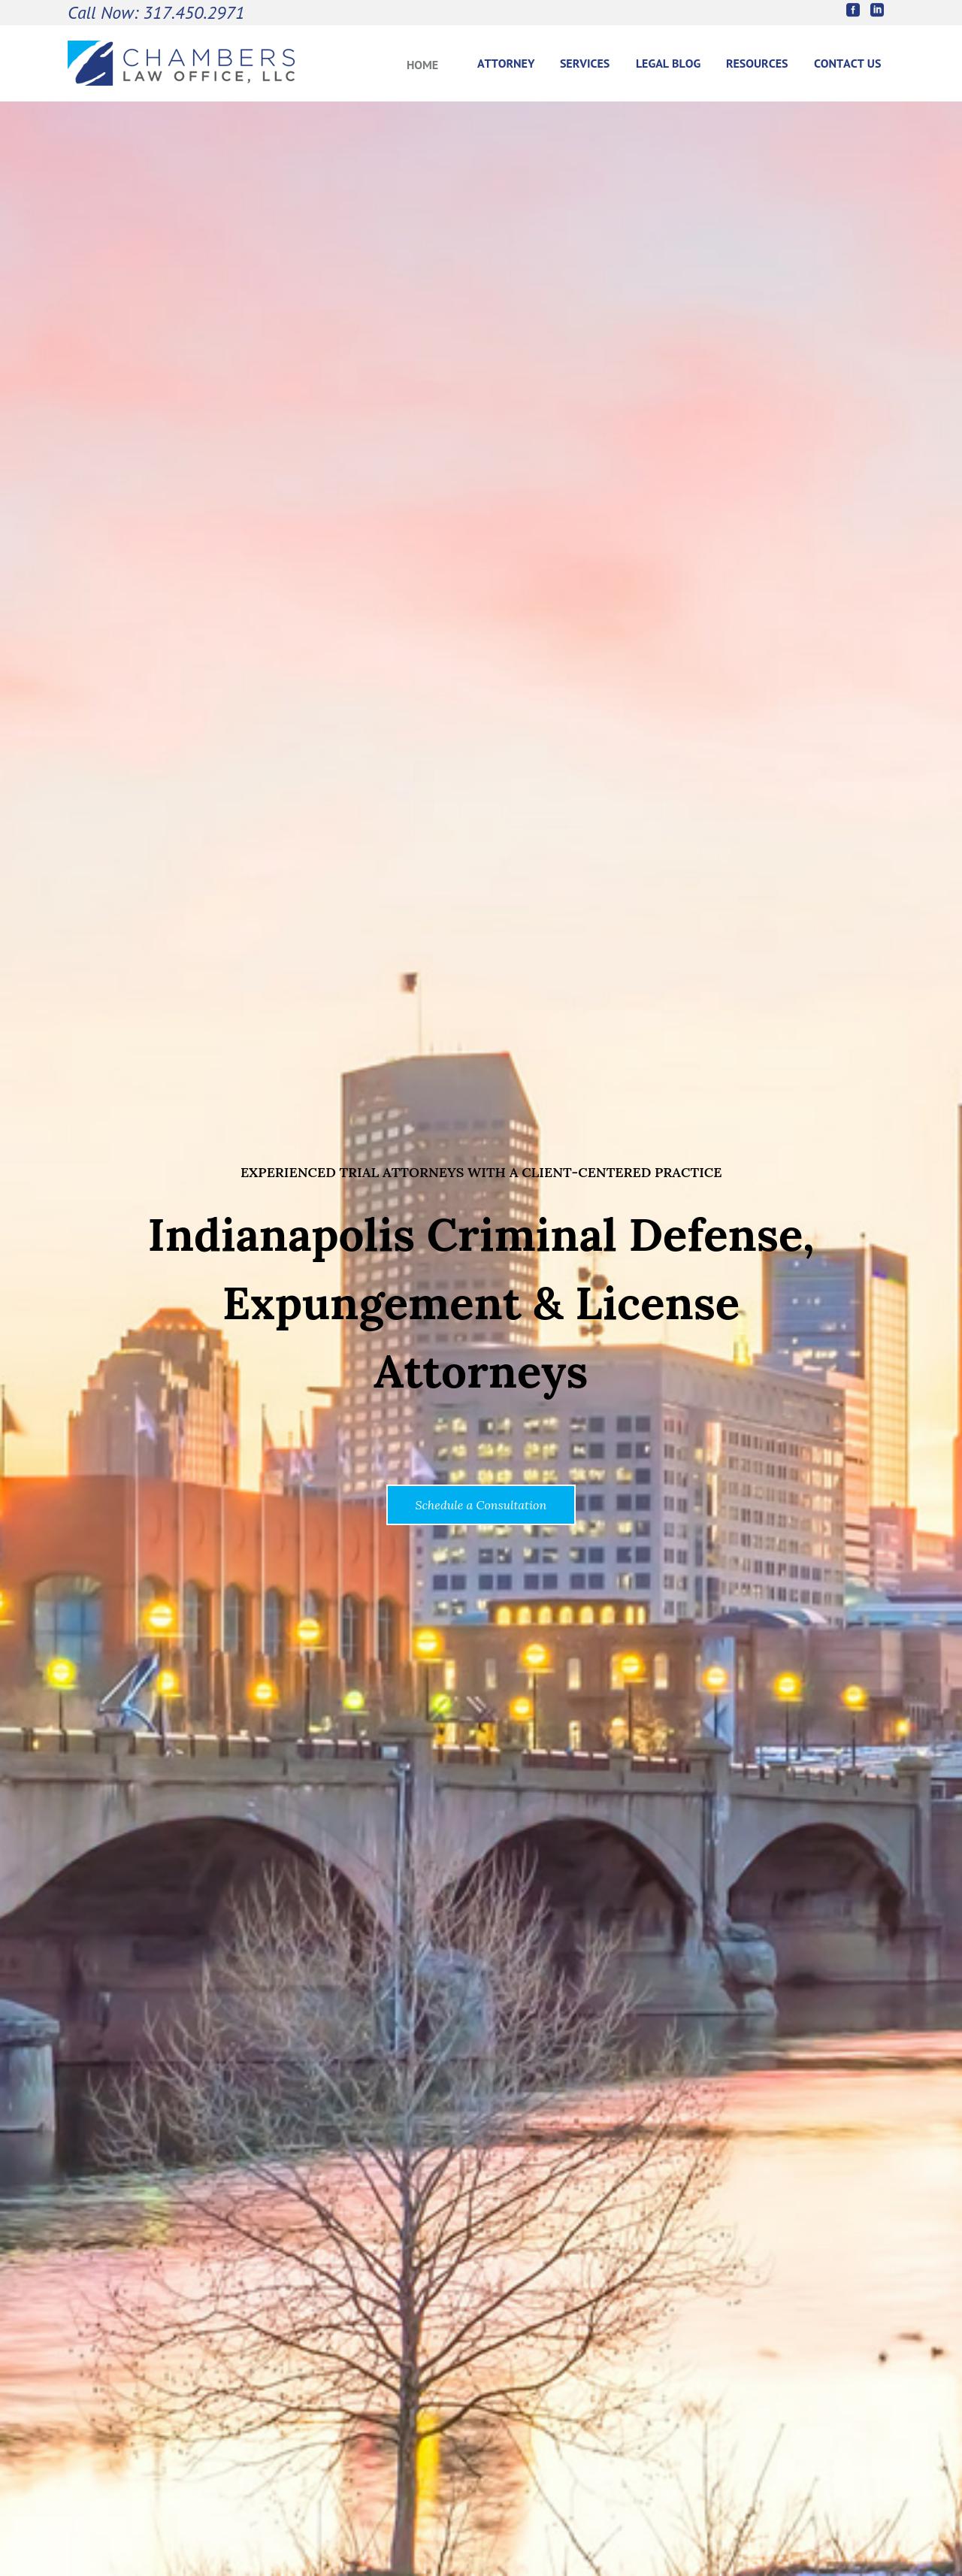 Chambers Law Office, LLC - Indianapolis IN Lawyers